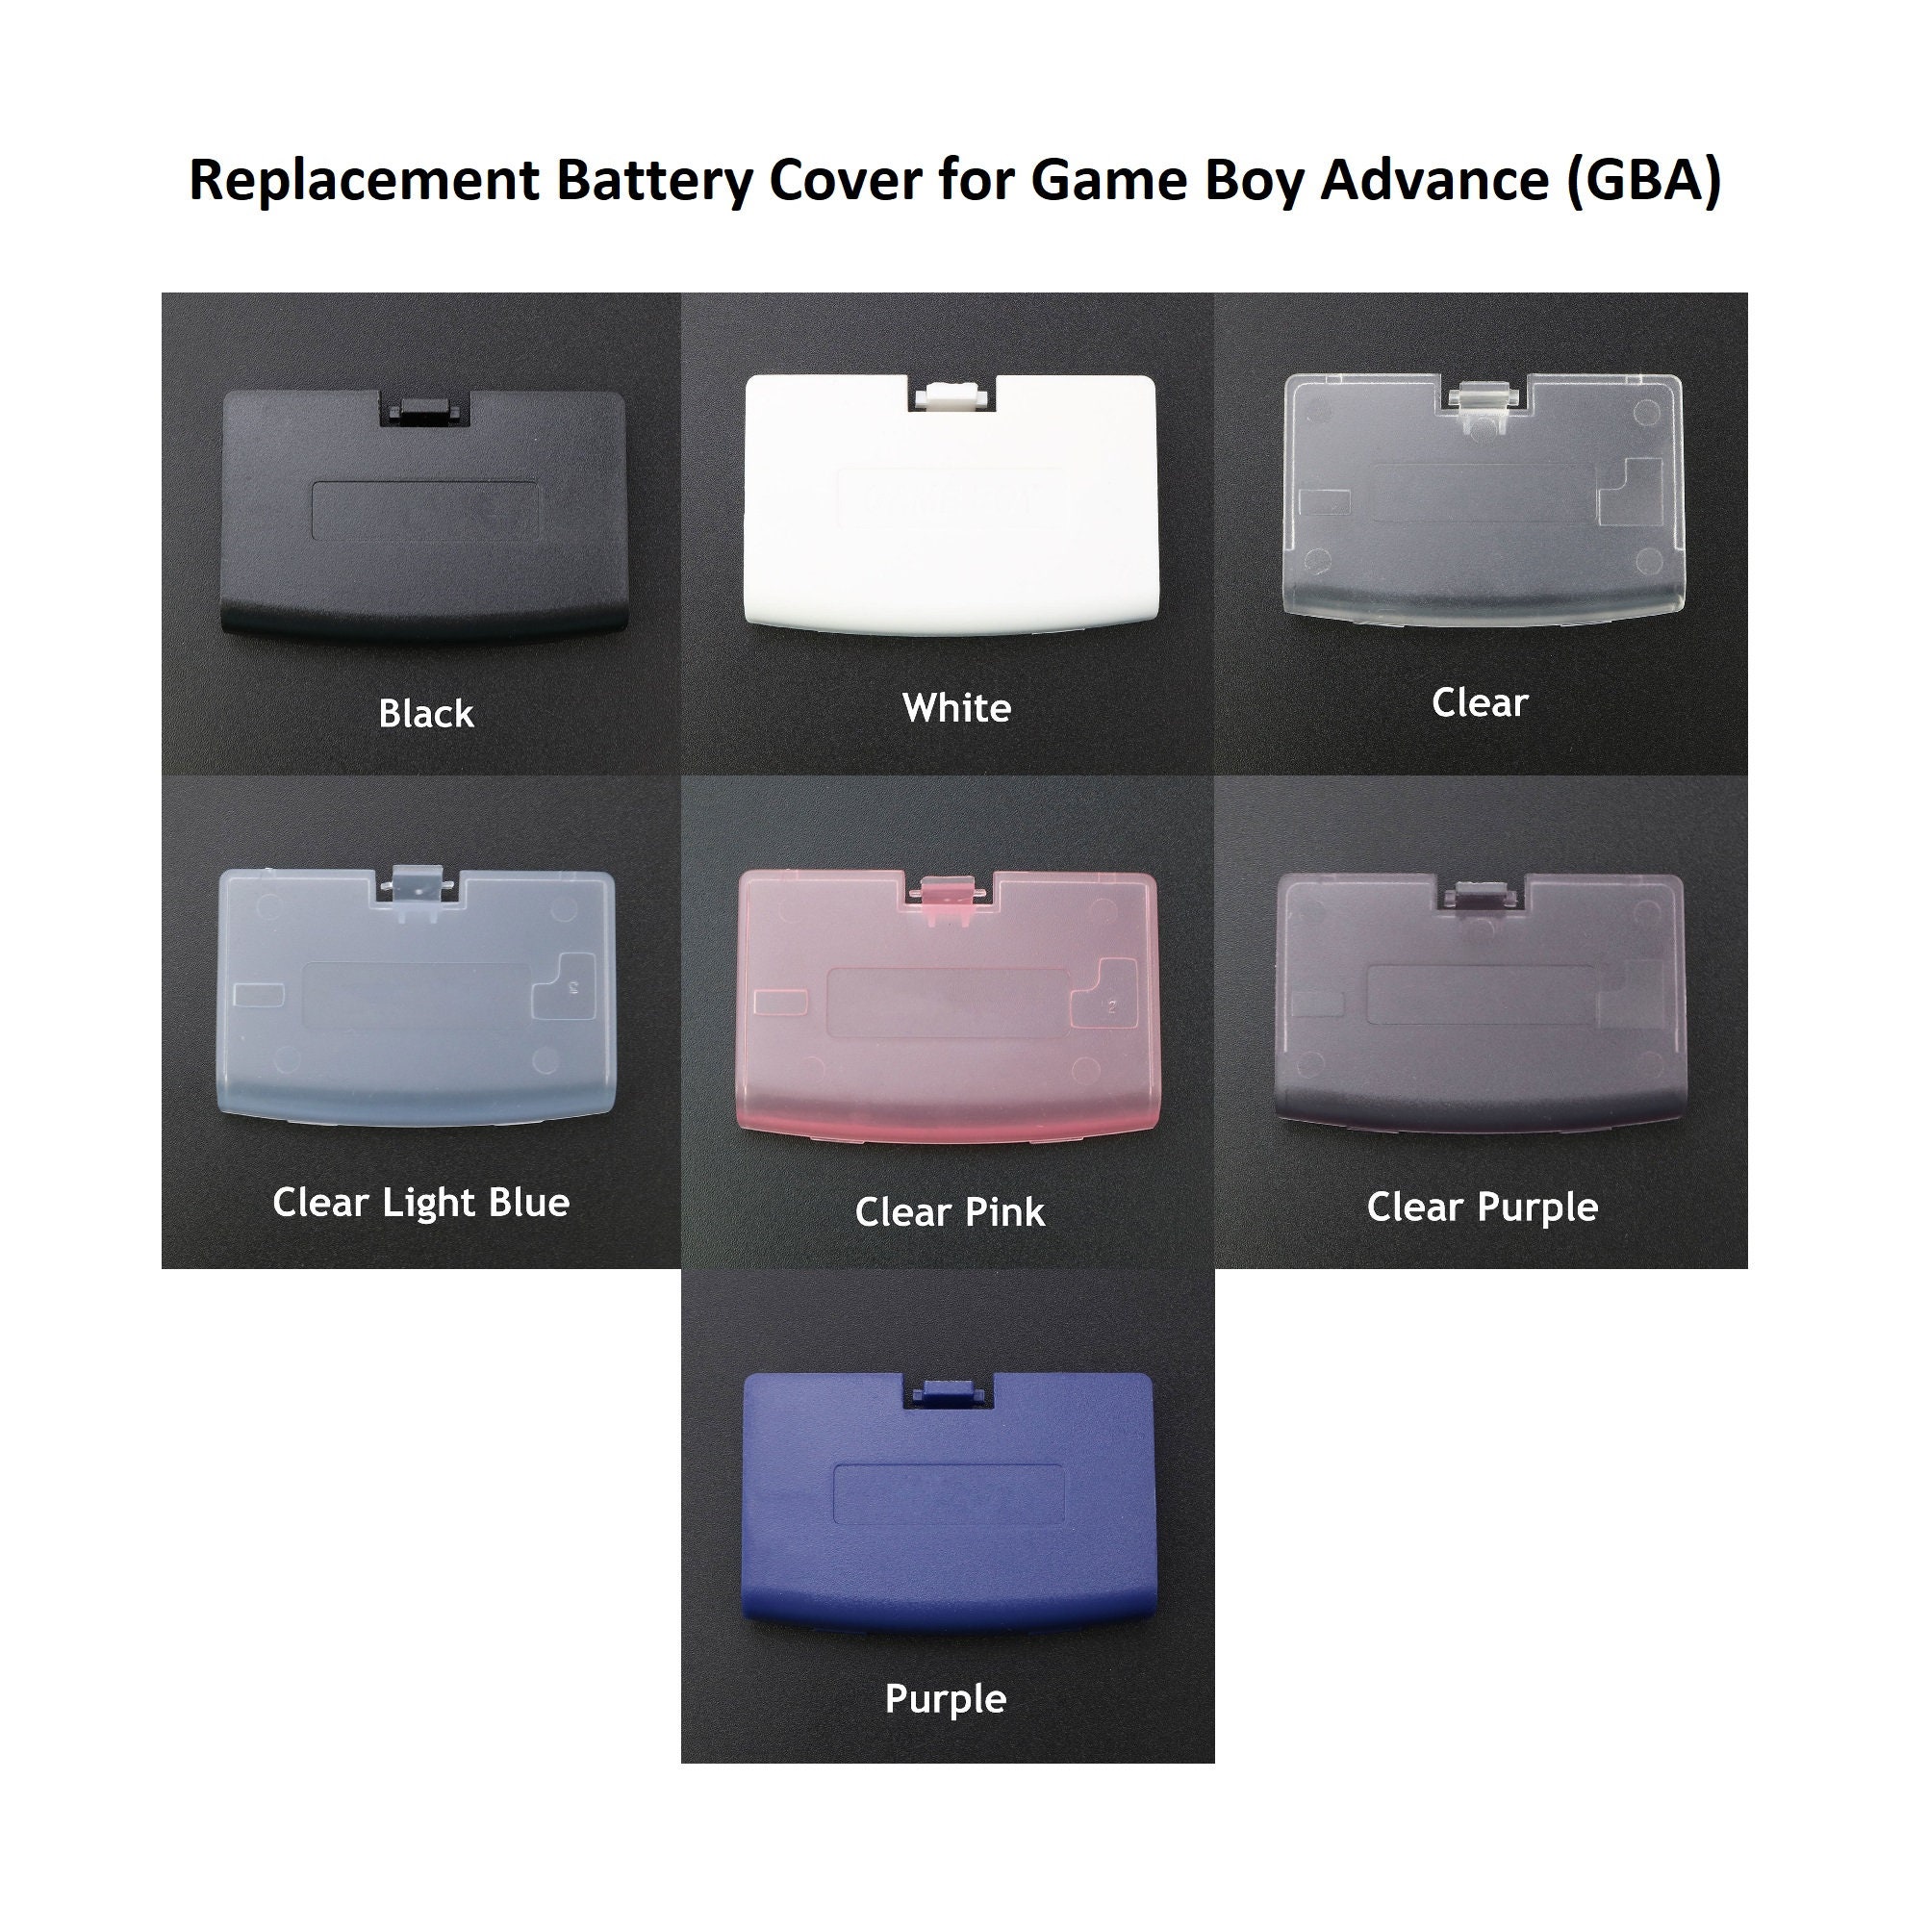 Wahoo Tickr battery cover